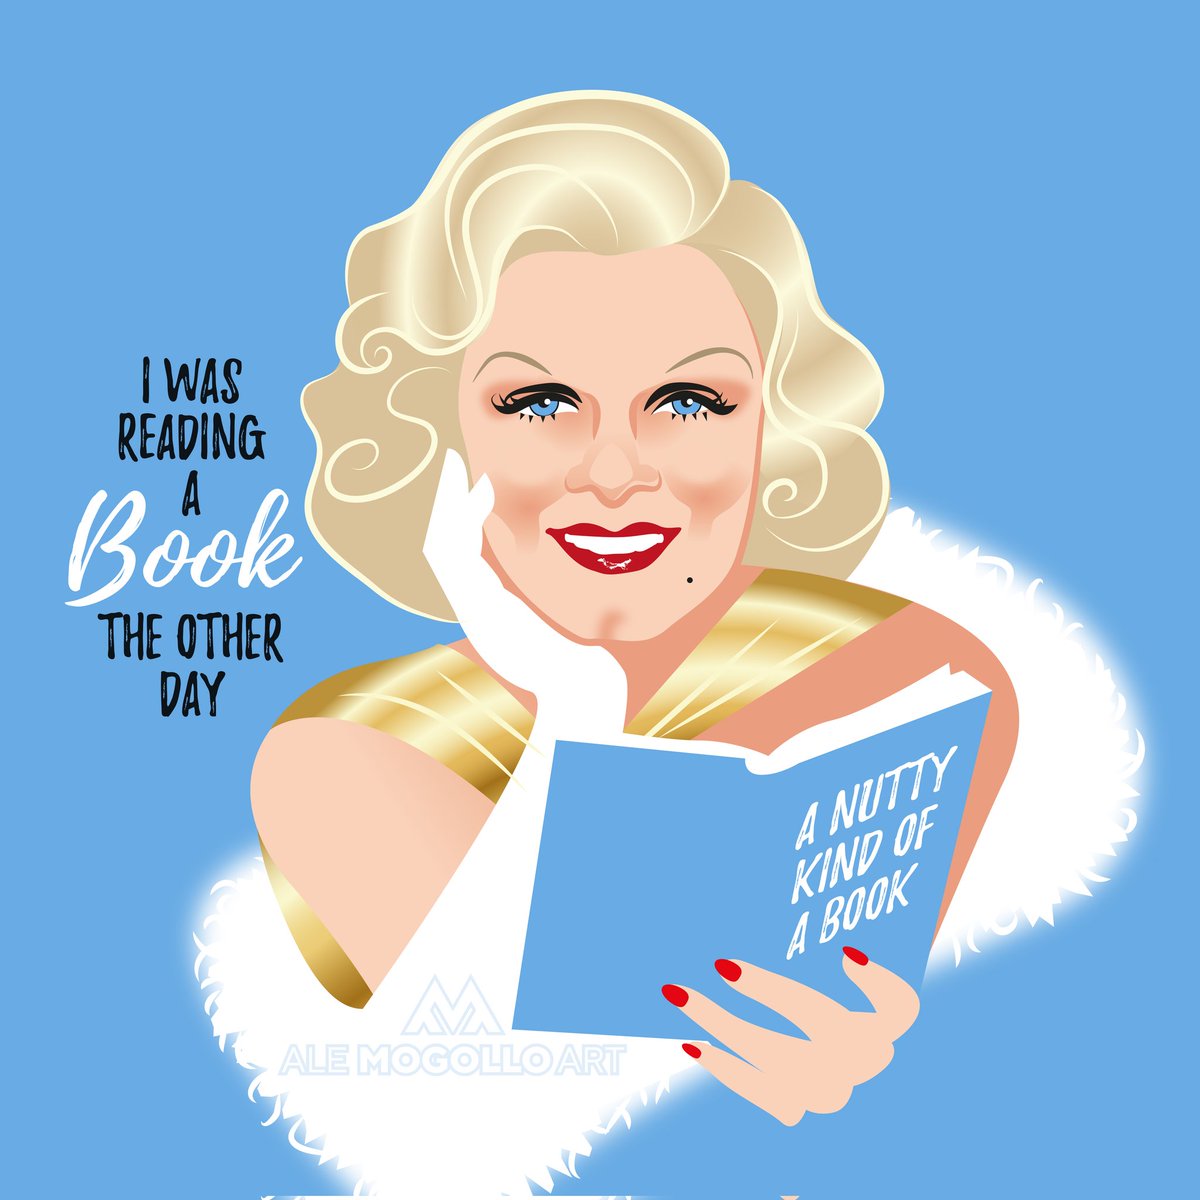 Celebrating the original platinum blonde, the glamorous and funny Jean Harlow on her birthday. She was born a day like today in 1911. 
#jeanharlow #platinumblonde #blondebombshell #dinnerateight #reddust #oldhollywood #oldhollywoodglamour #fanart #alejandromogolloart